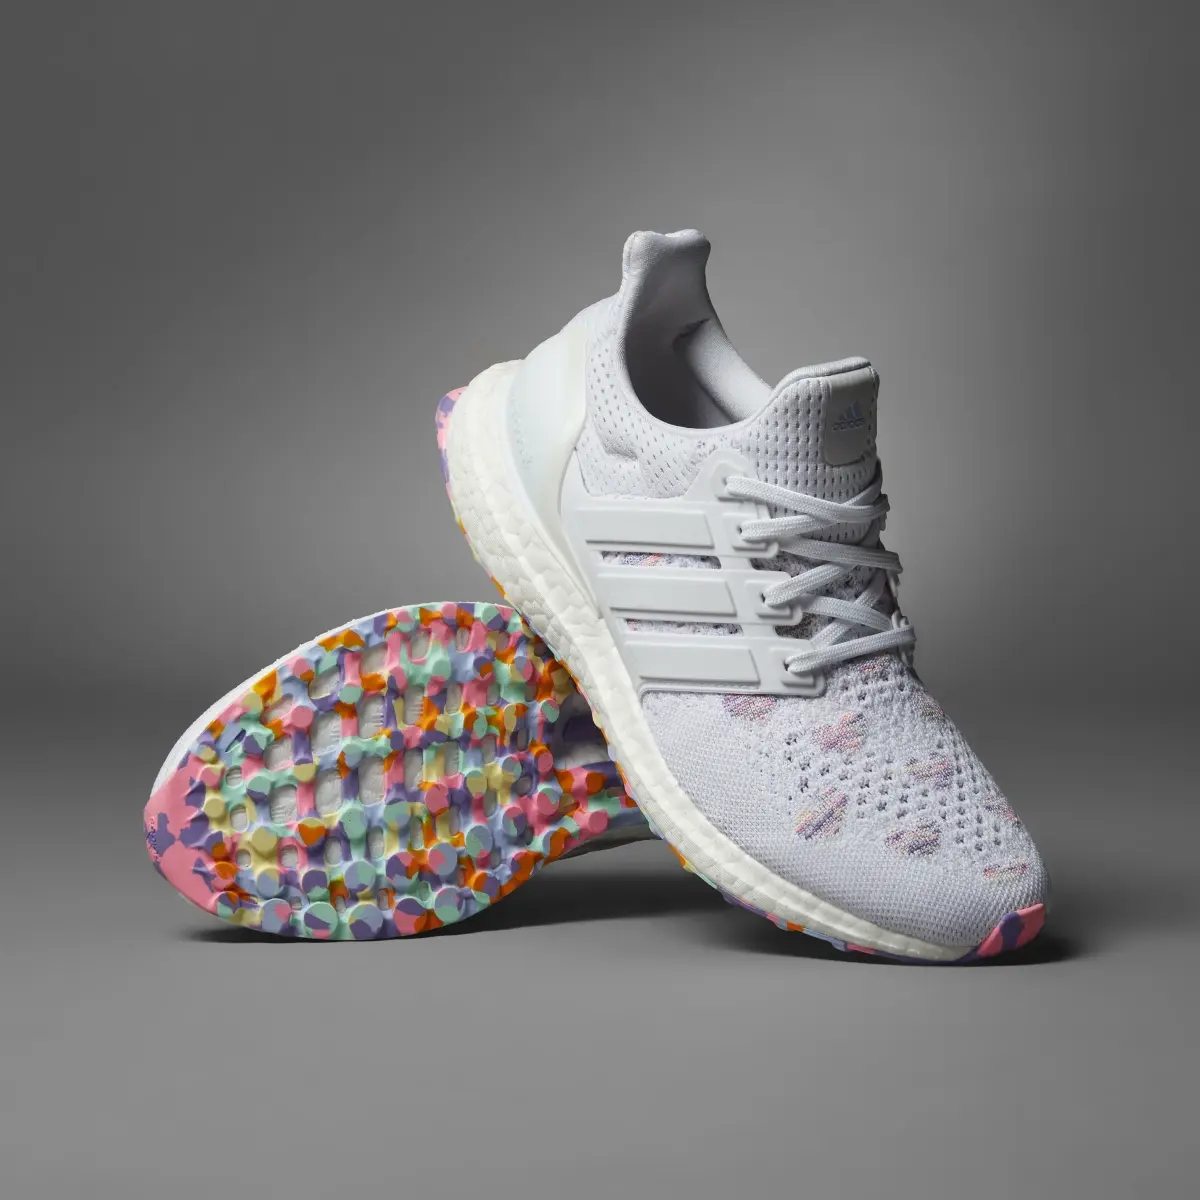 Adidas Valentine's Day Ultraboost 1.0 Shoes. 1